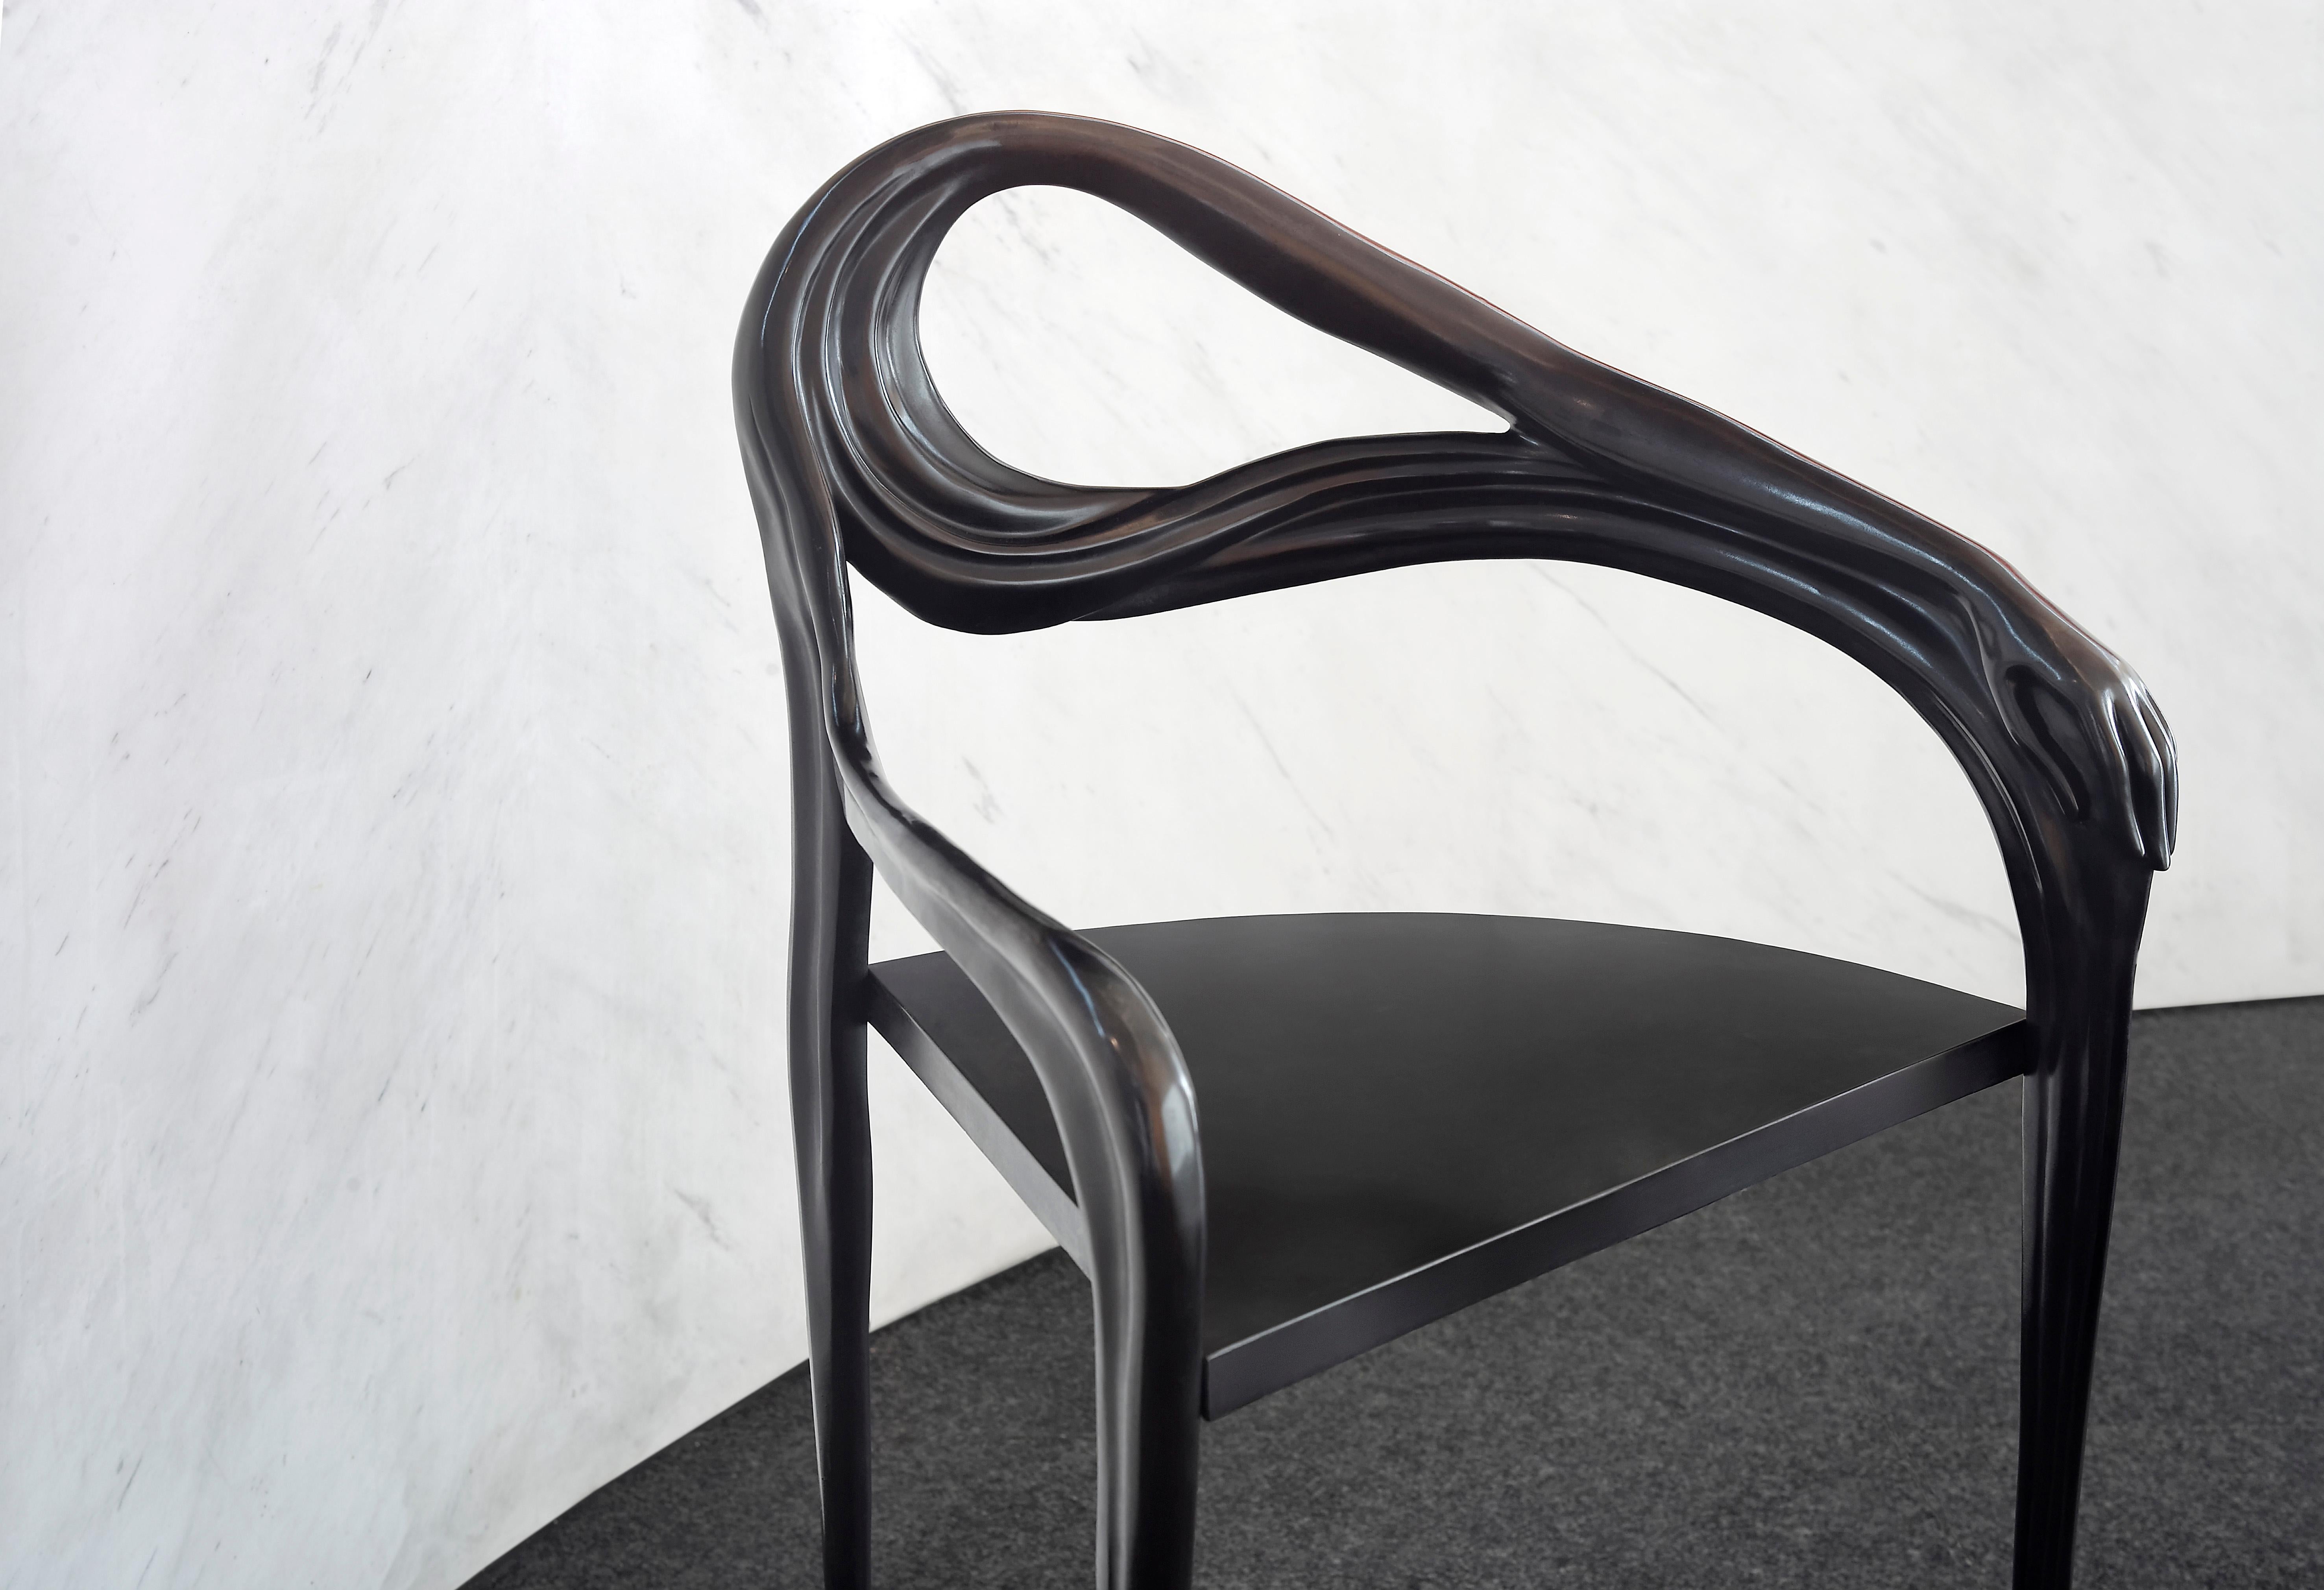 Leda armchair designed by Dali manufactured by BD.

All pieces of ironwork in this collection are made of brass. The Black Label Leda collection has an artisanal application of a special patina (metal dissolved in nitric acid) which is applied to